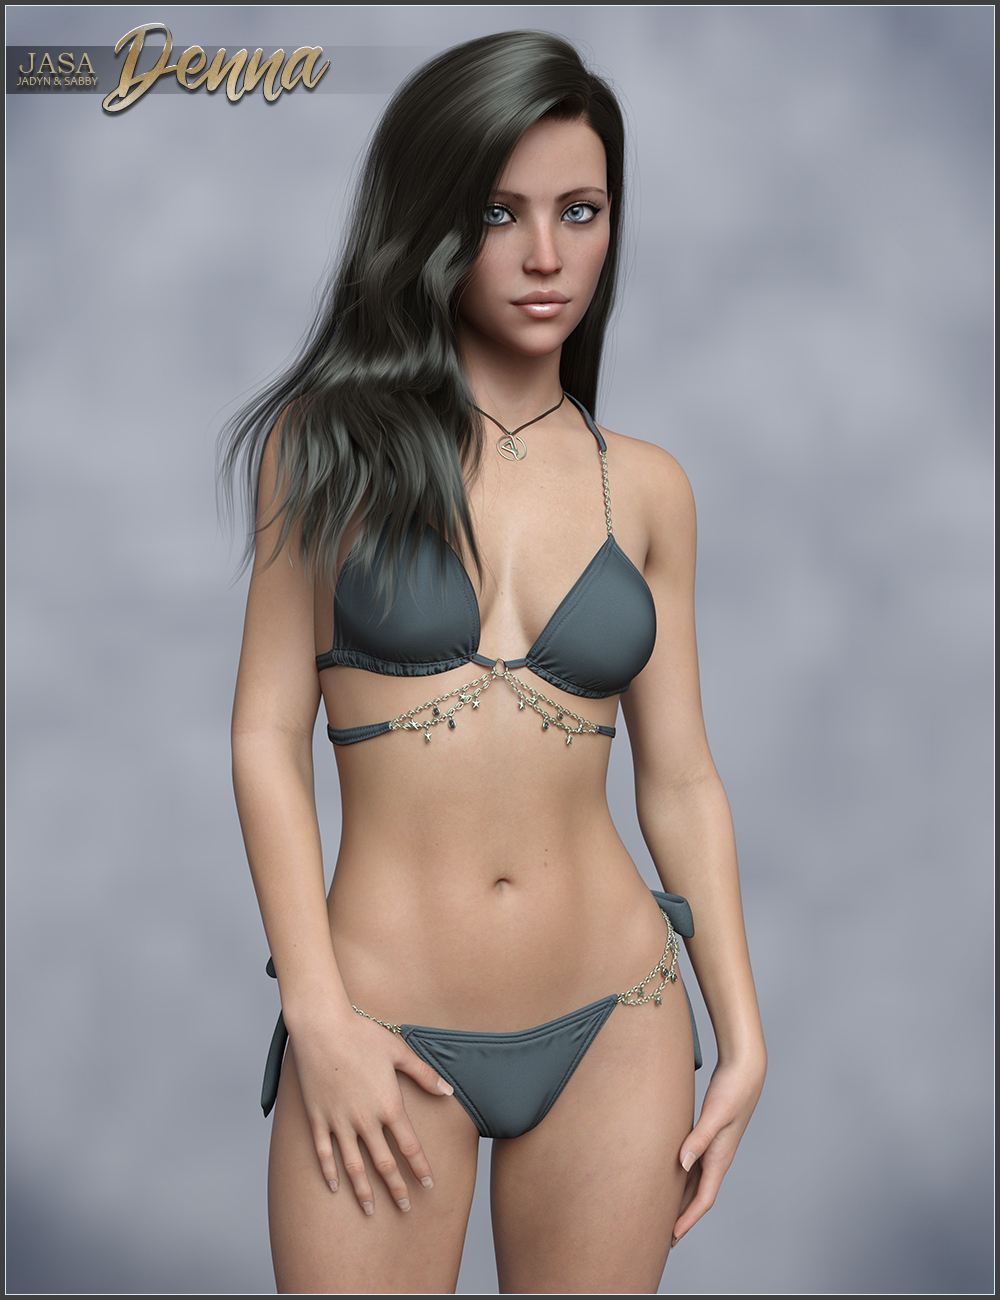 JASA Denna for Genesis 8 and 8.1 Female